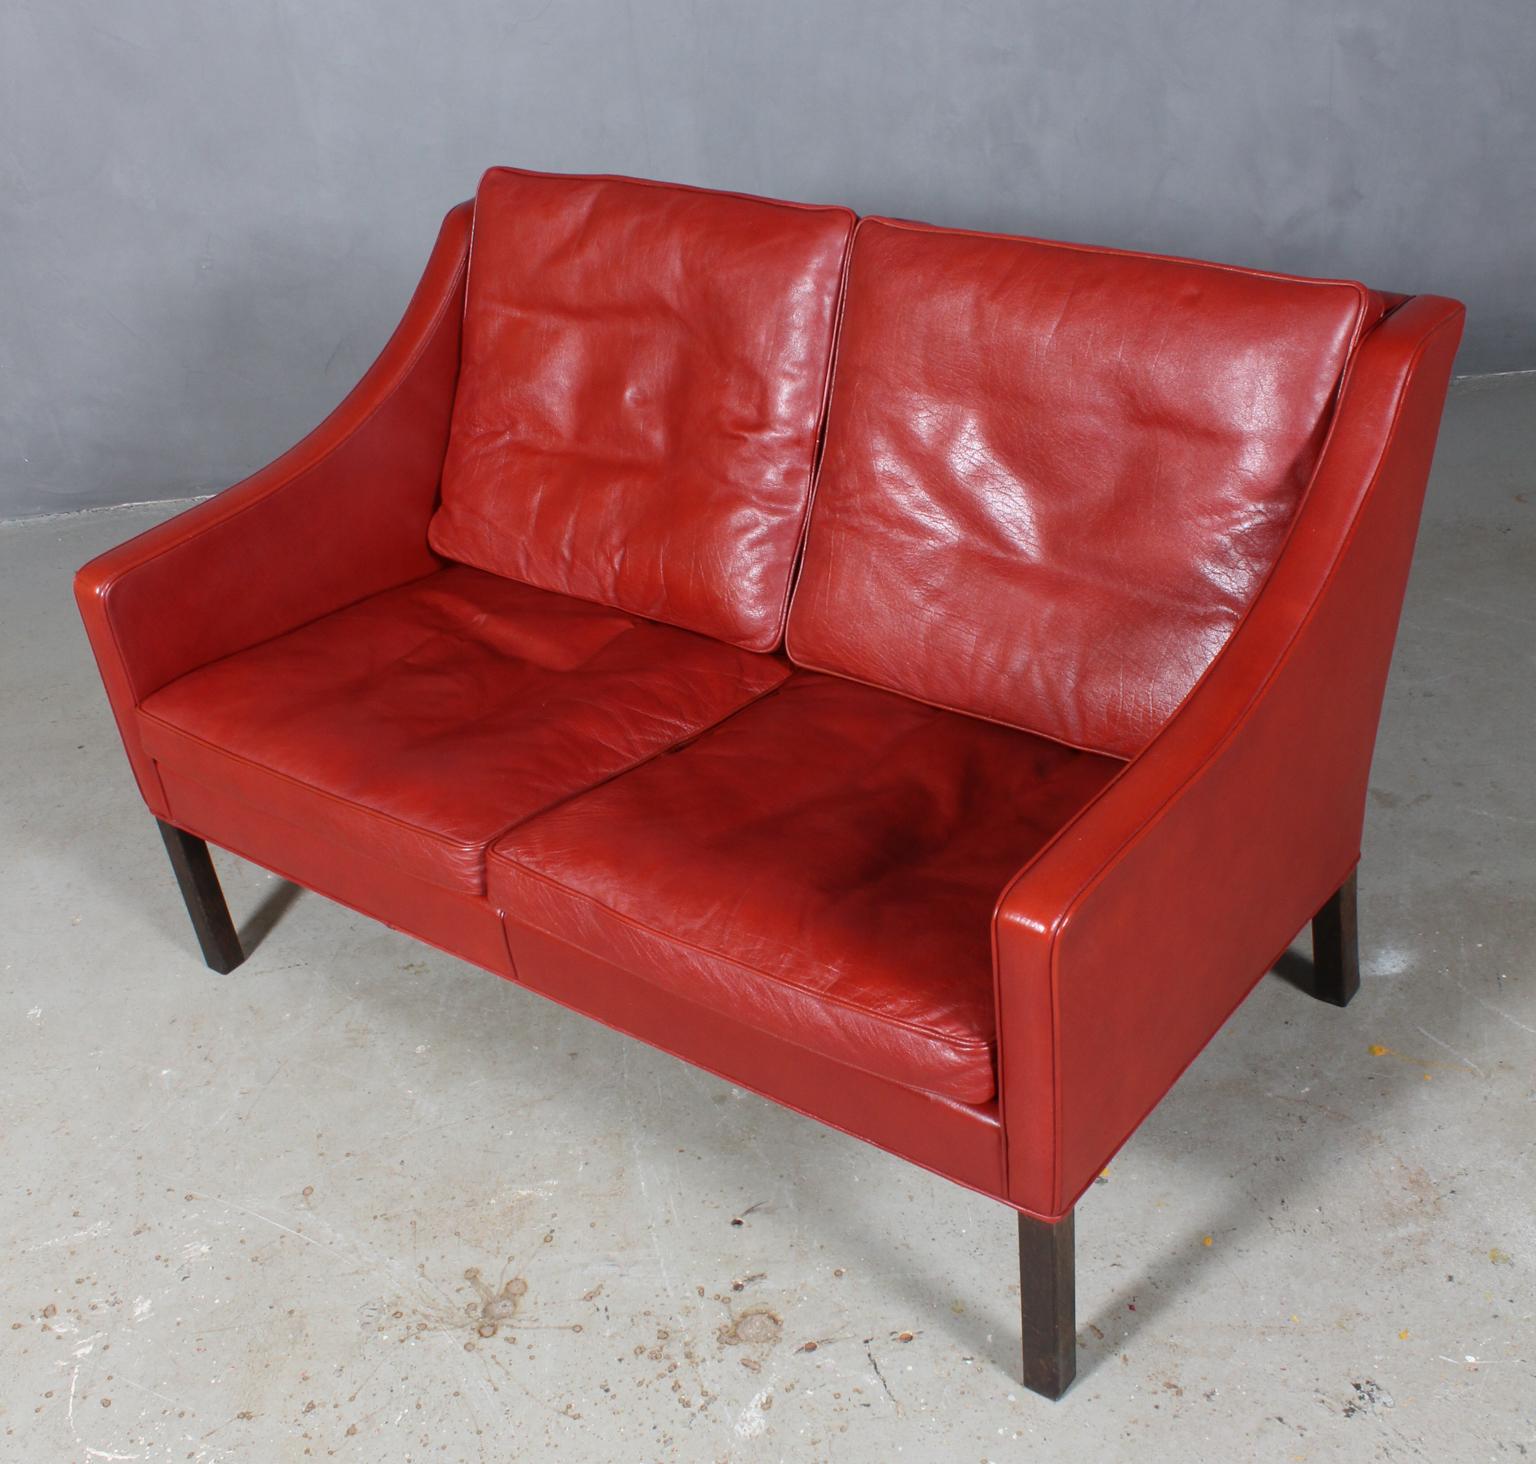 Børge Mogensen two-seat sofa original upholstered with red leather upholstery.

Legs of smoked oak.

Model 2208, made by Fredericia furniture.